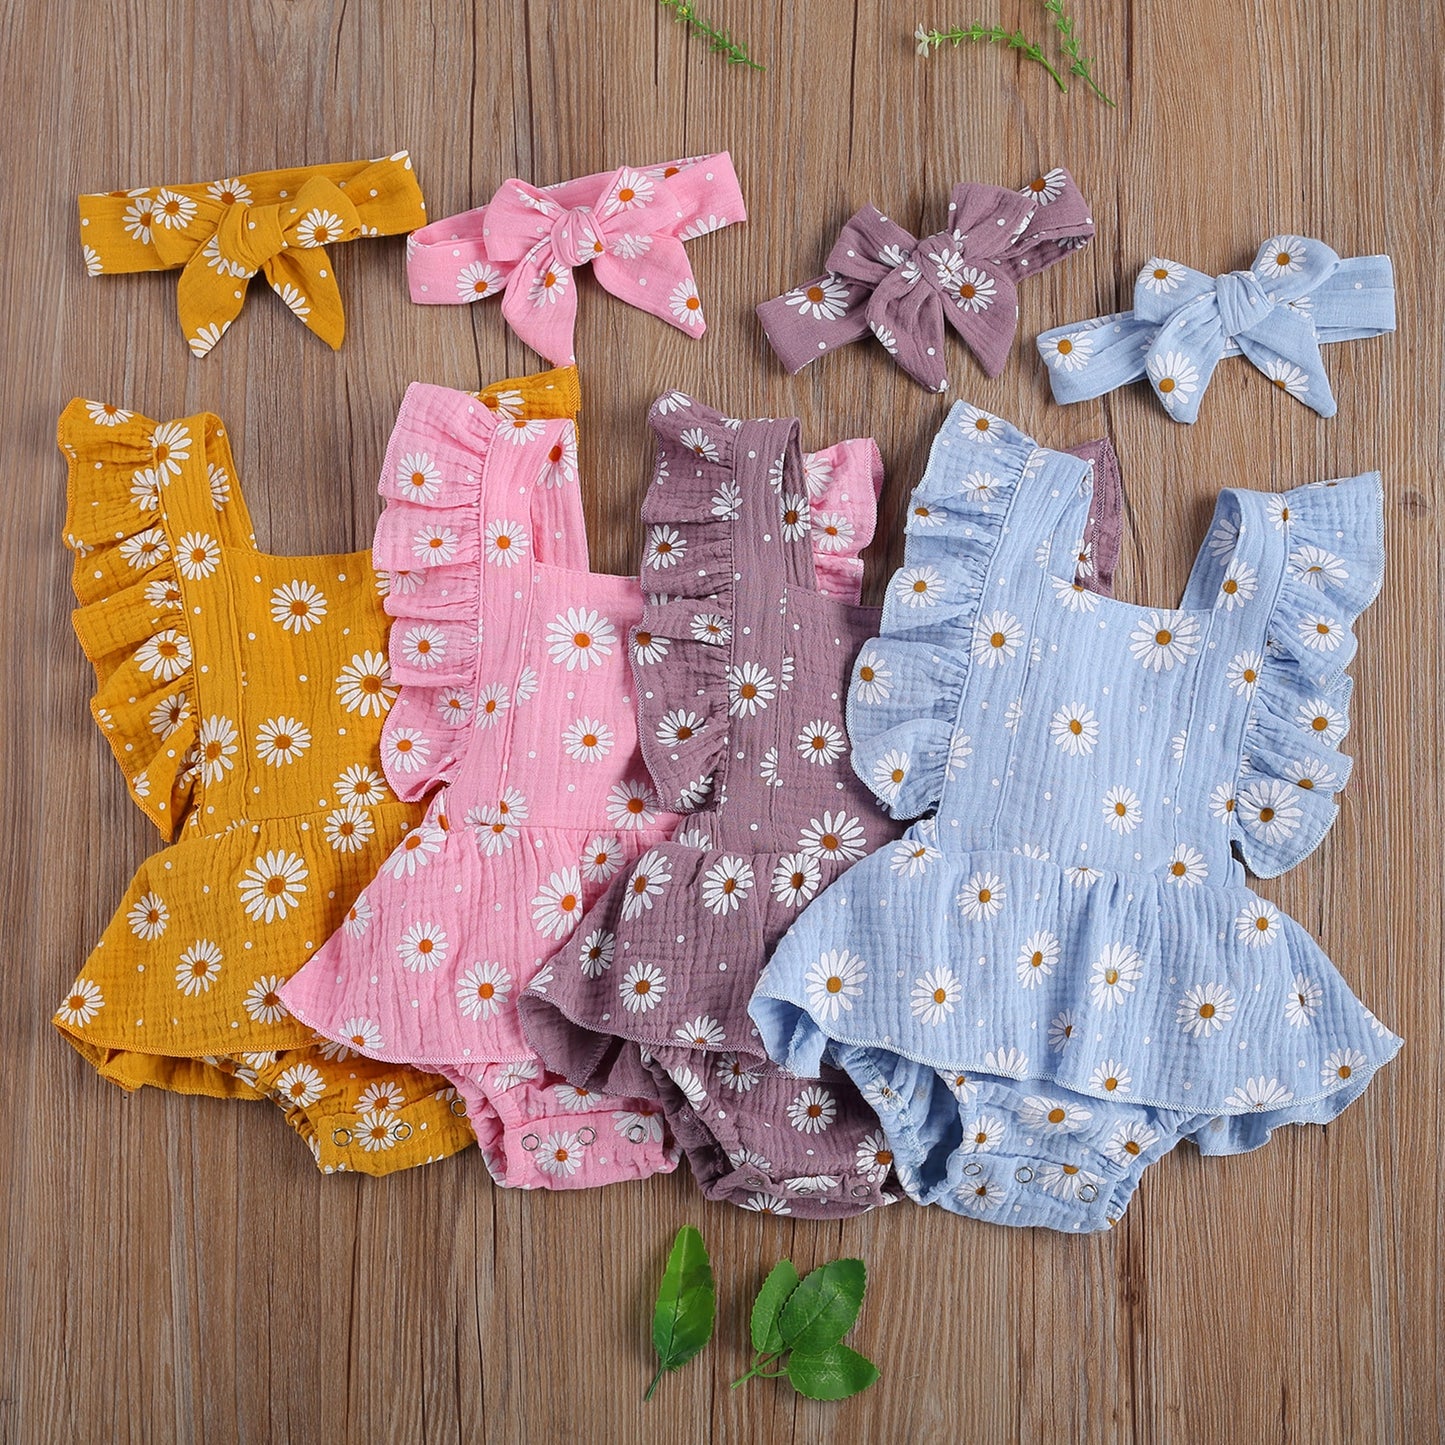 Baby Girls Daisy Playsuits Ruffled Bodysuit+Headaband 2pcs Sets Print Fly Sleeve Romper Floral Jumpsuit Infant Summer Clothes